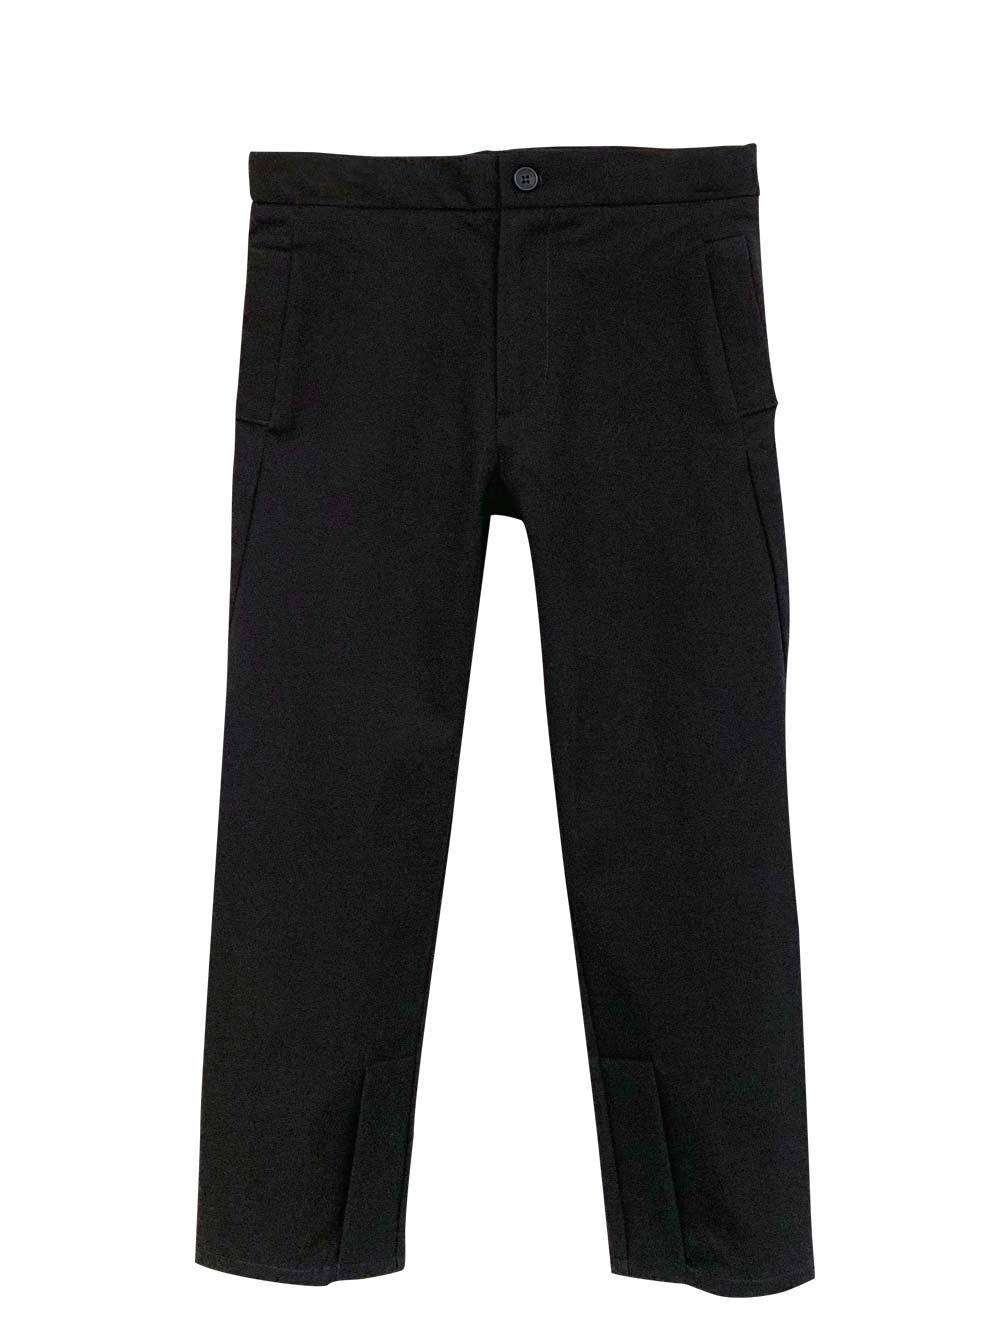 Buy Black n Bianco Boys' First Class Slim Fit Trousers Dress Pants Gently  Tapered Flat Front - Presented by Baby Muffin (8, Midnight Black) at  Amazon.in